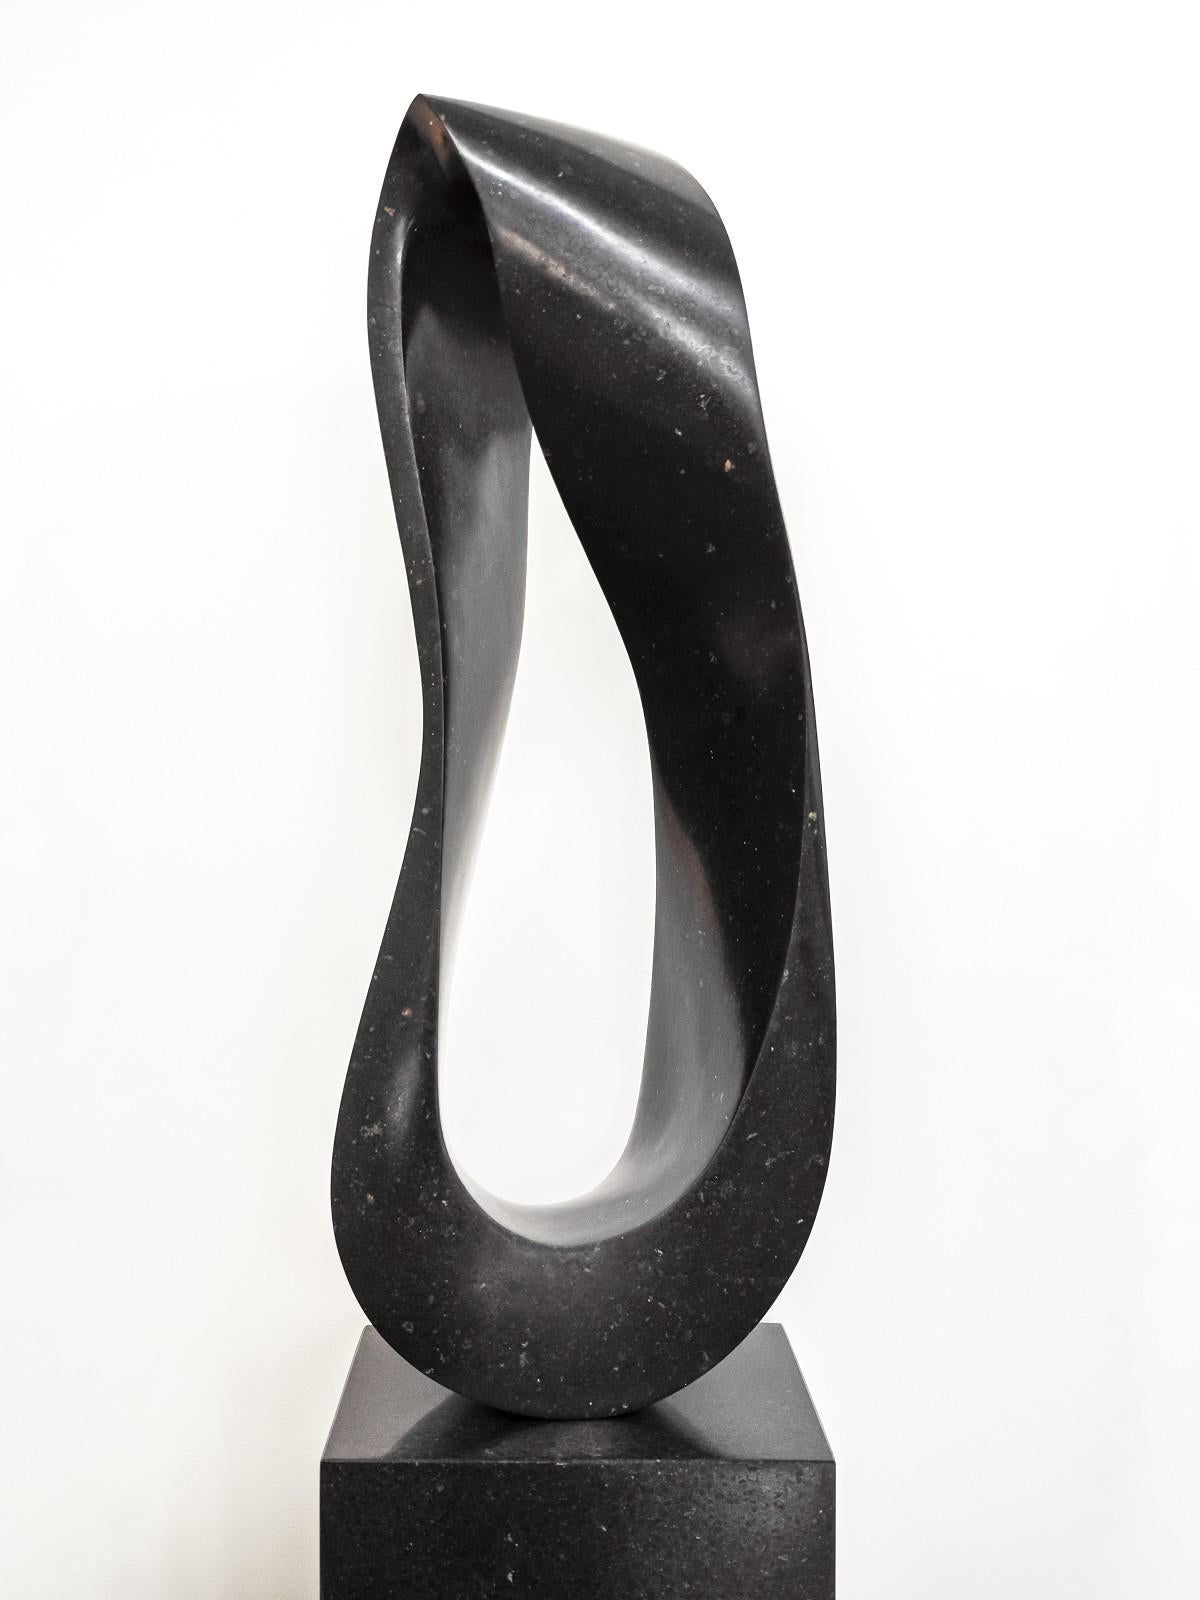 Mobius H3 10/50 - smooth, elegant, black granite, abstract sculpture on plinth - Sculpture by Jeremy Guy